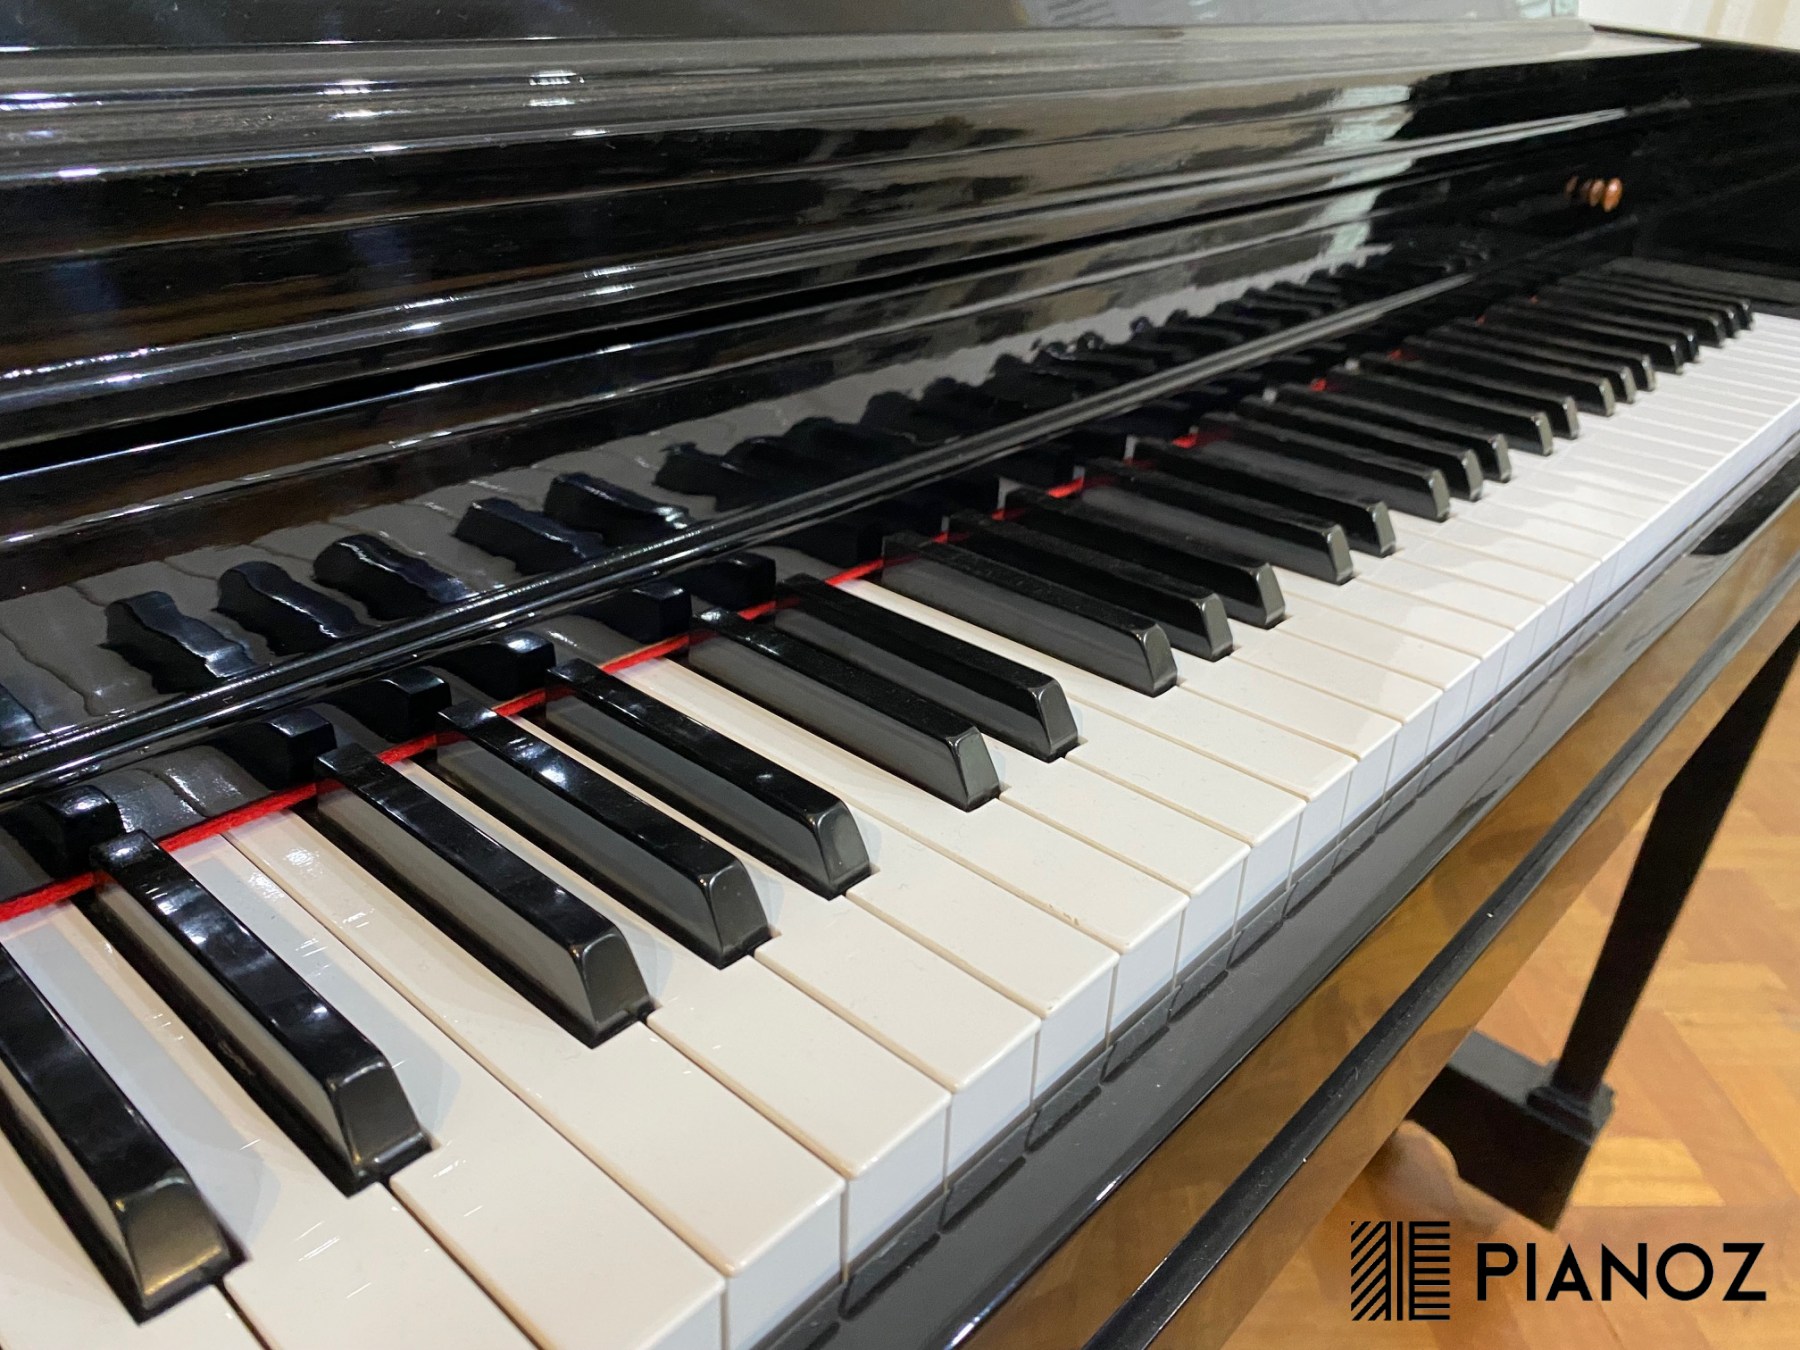 Everett Refurbished Upright Piano piano for sale in UK